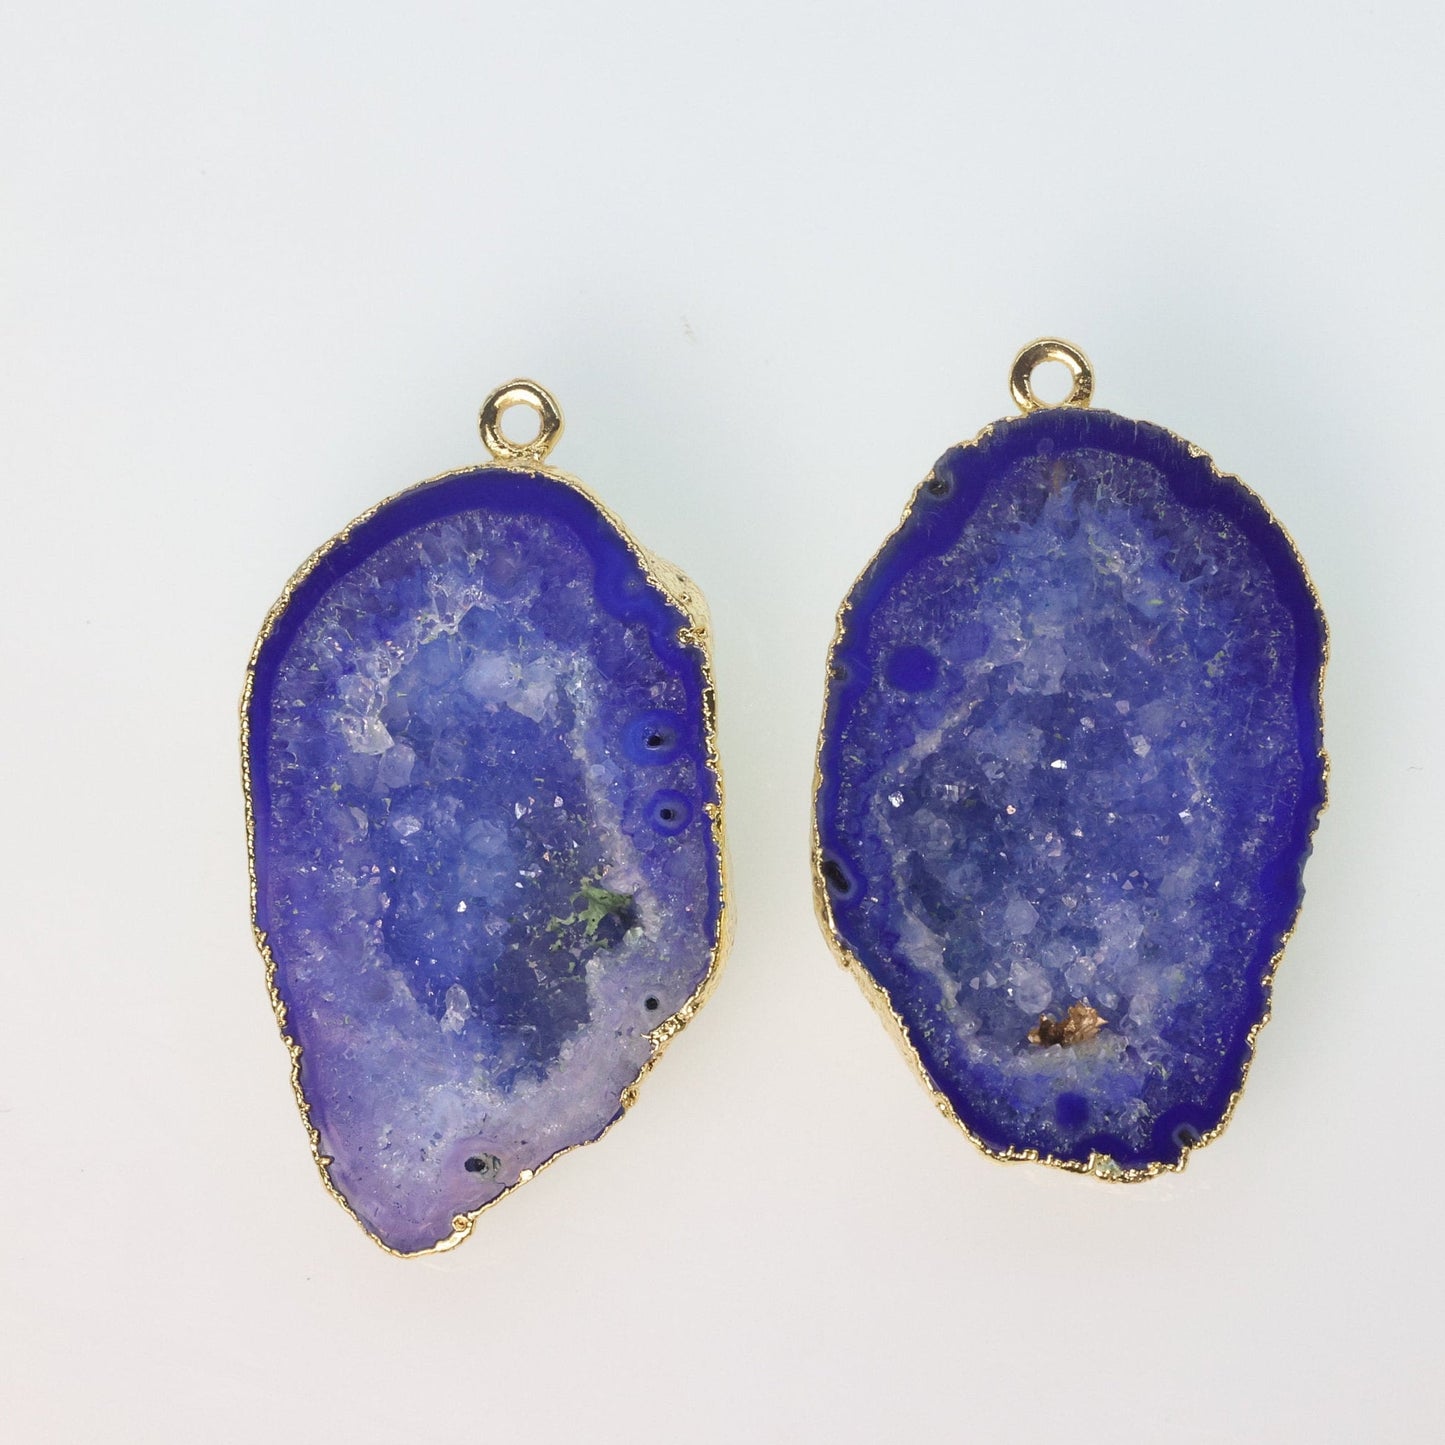 Blue Agate cave druzy or tobasco druzy geode Pairs For Earrings ***You can Order Exact Pairs as in Photos*** - Meena Design